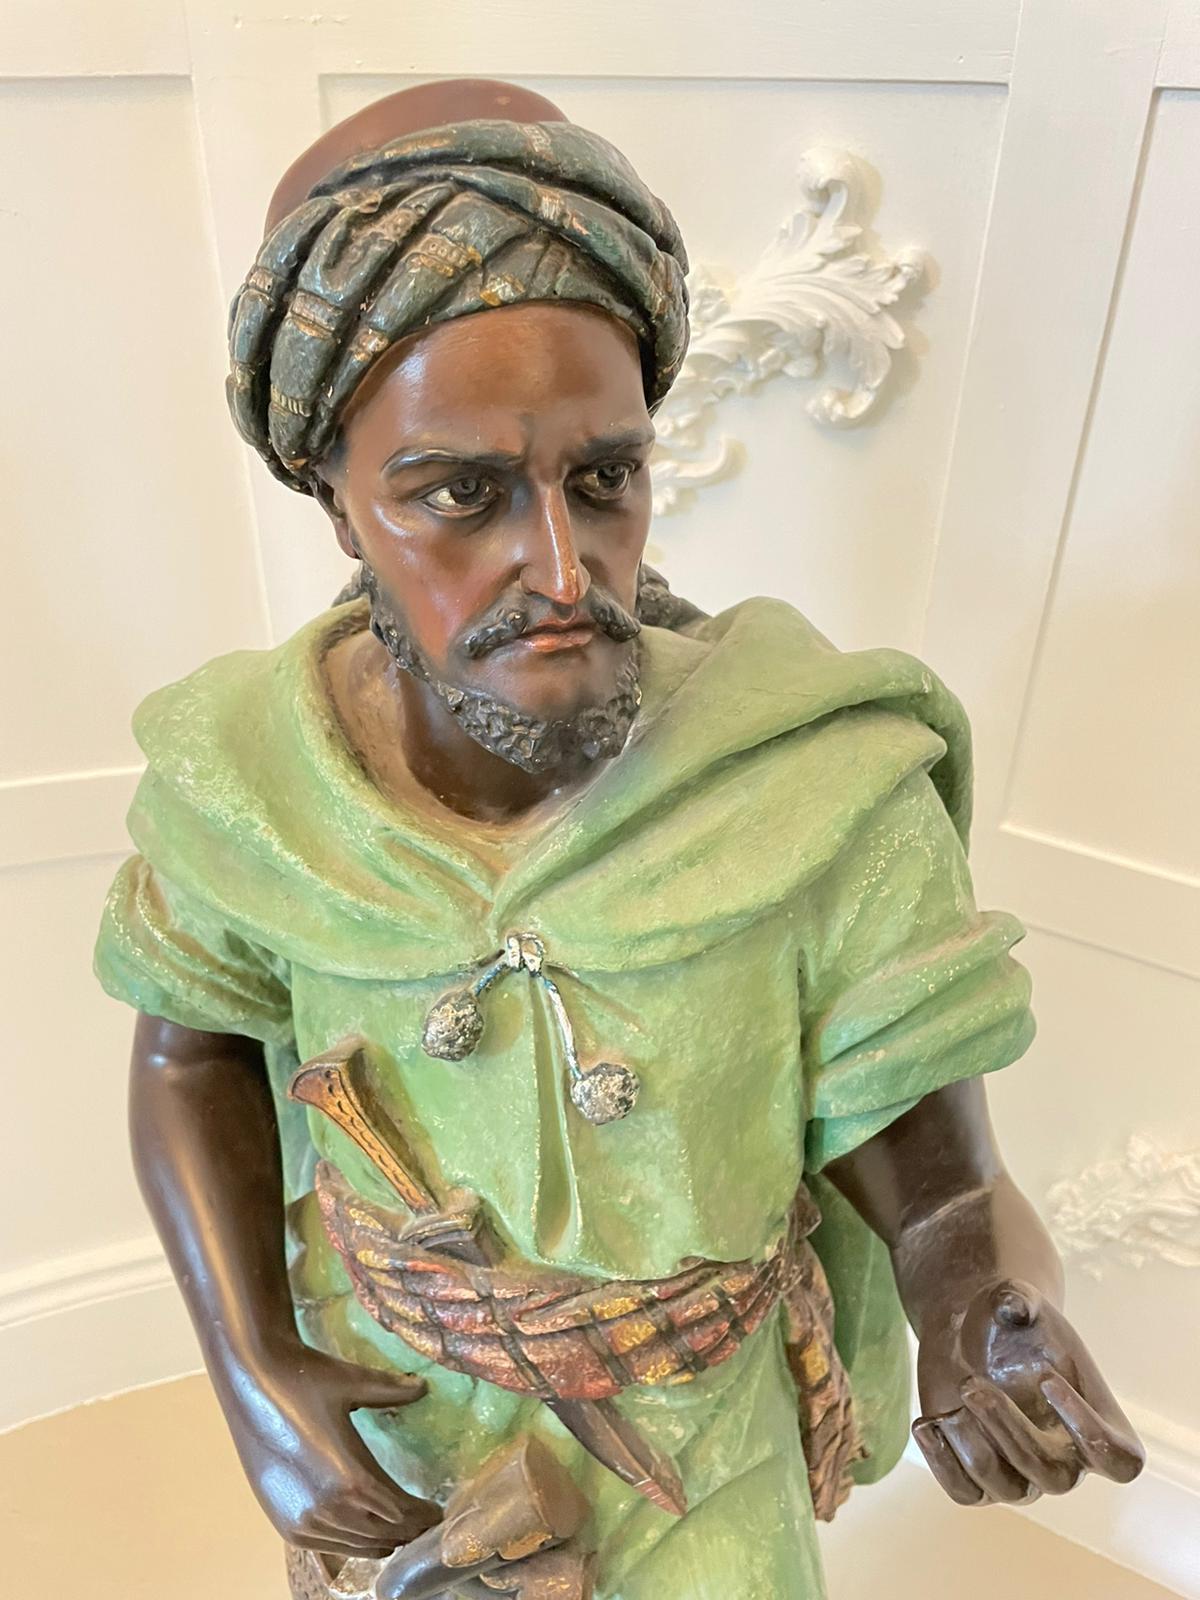 Spectacular pair of large antique quality orientalist polychromed plaster Arabesque or Moorish figures 
depicting two males in traditional moorish robes and headdress with artfully shaped hands. These amazing plaster figures with a polychromed